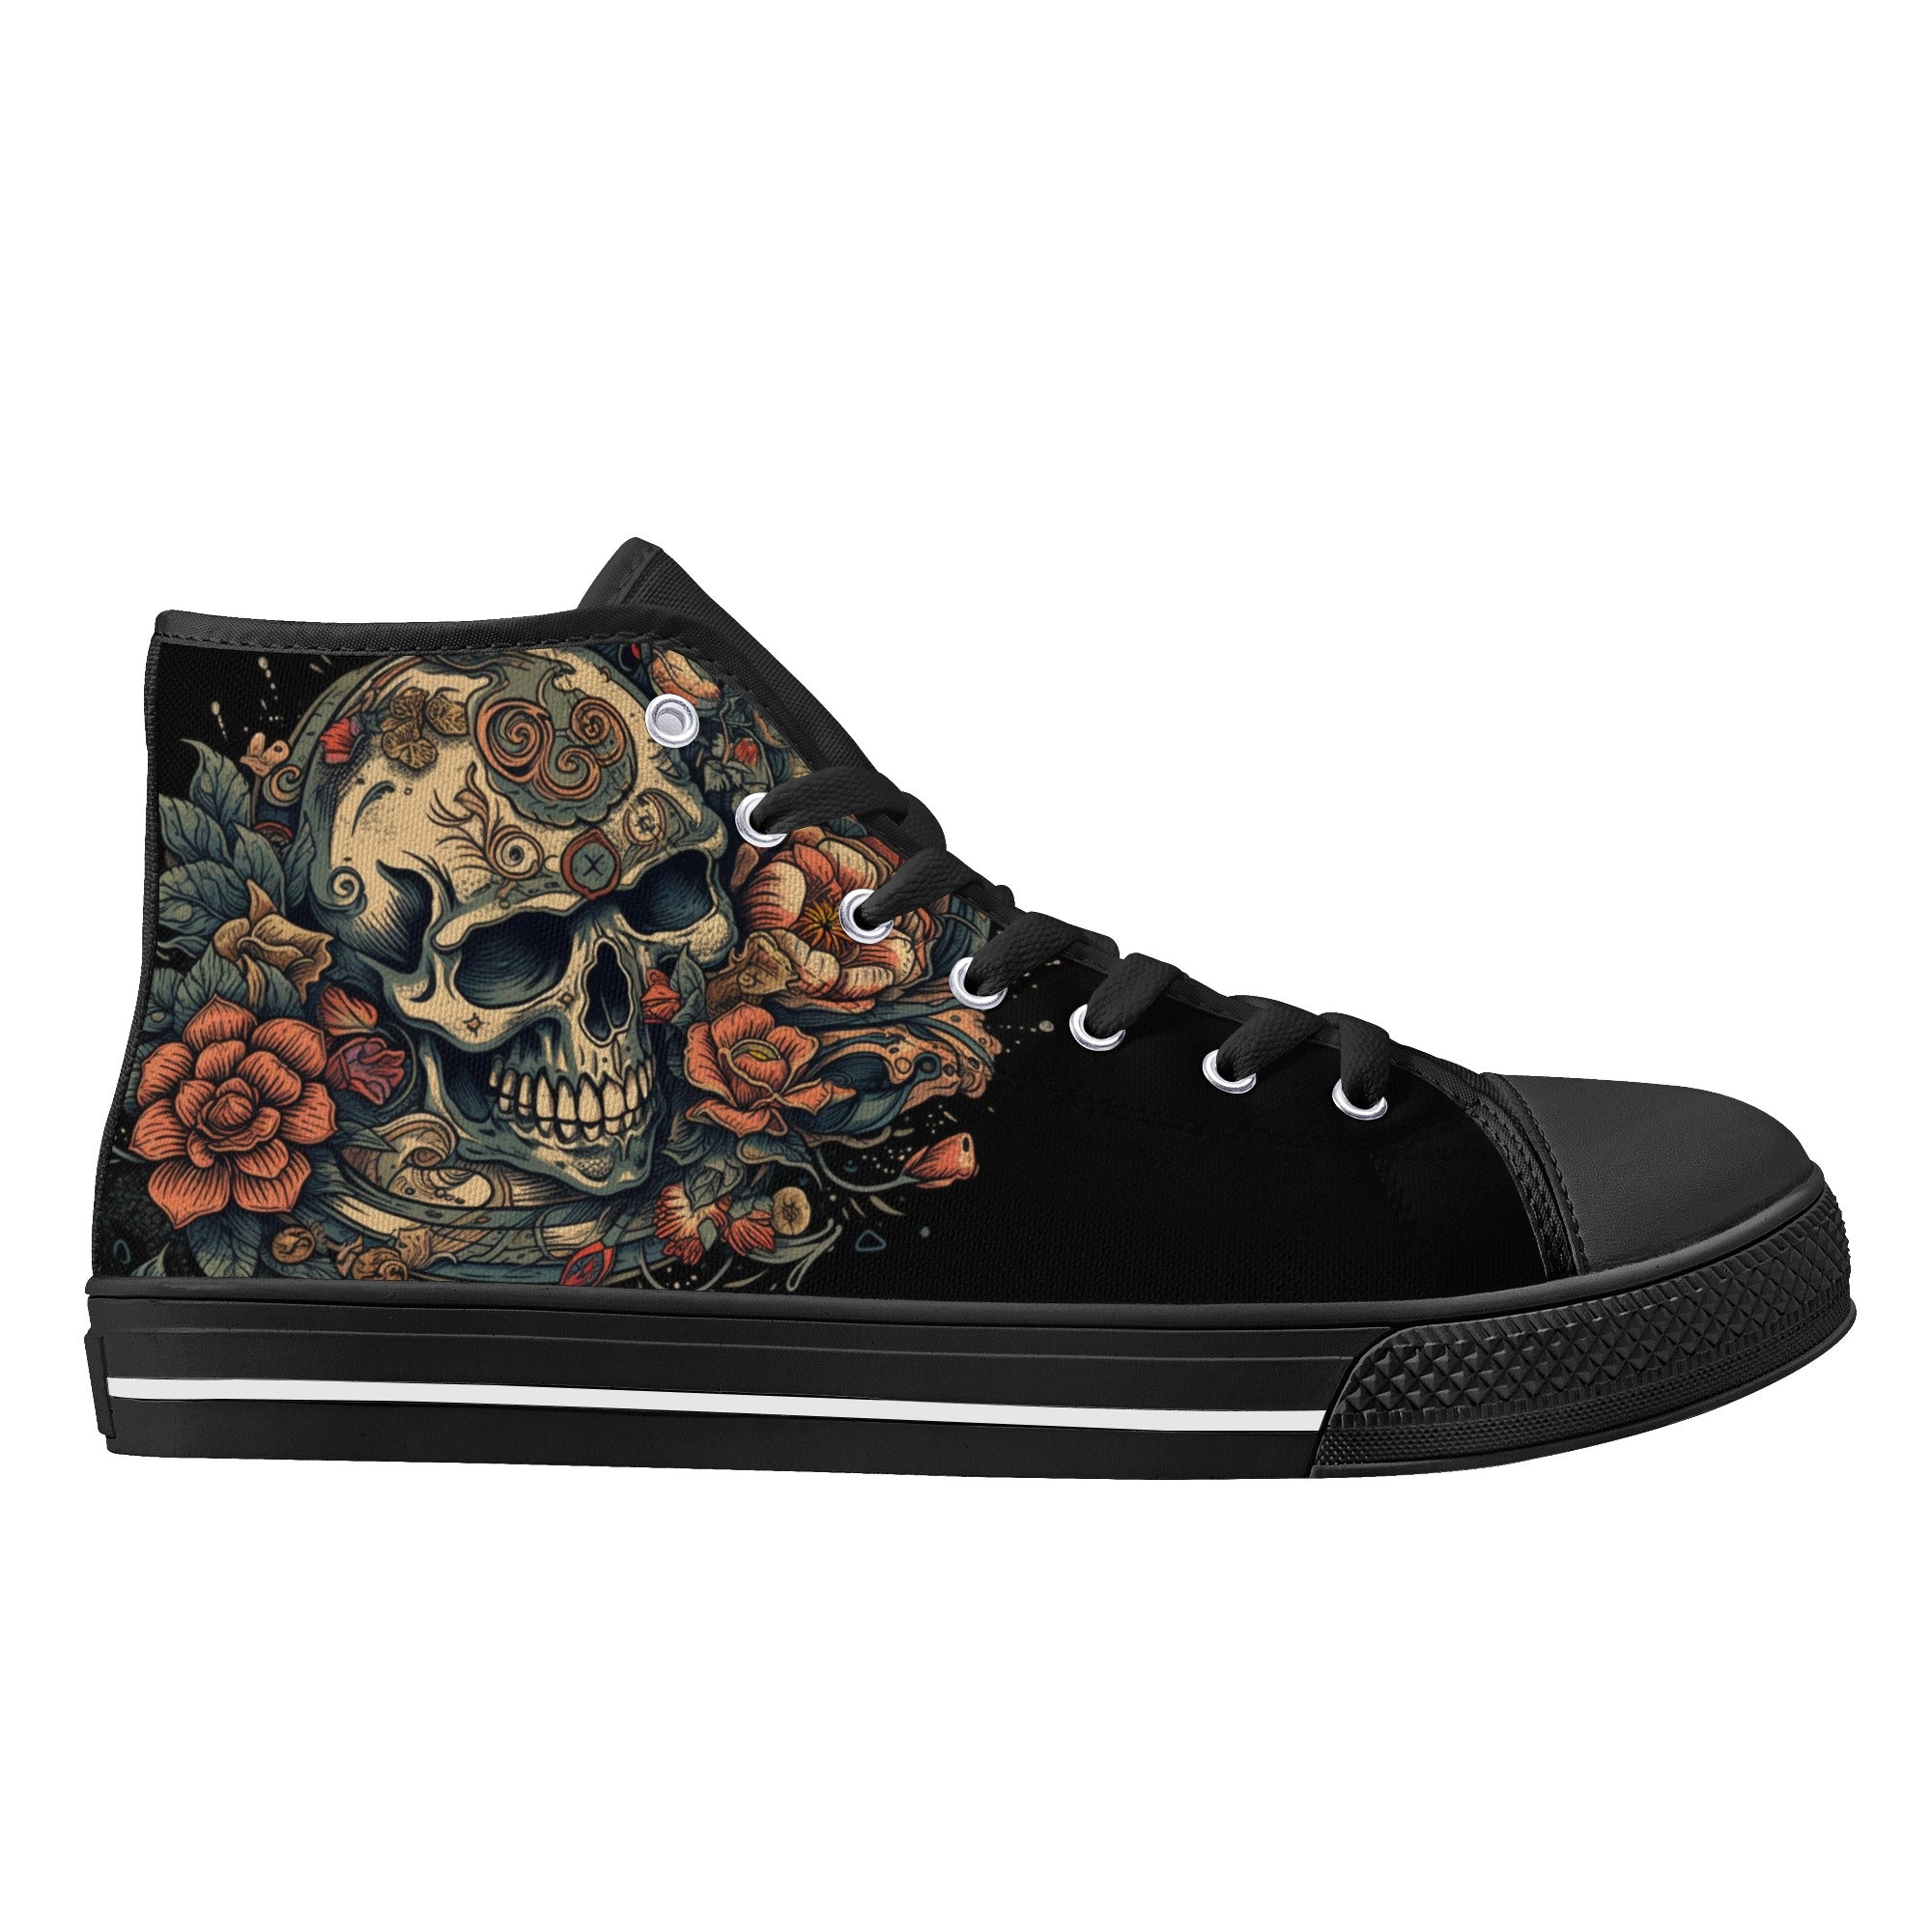 Skull and Roses Tattoo Women's Psychobilly High Top shoes